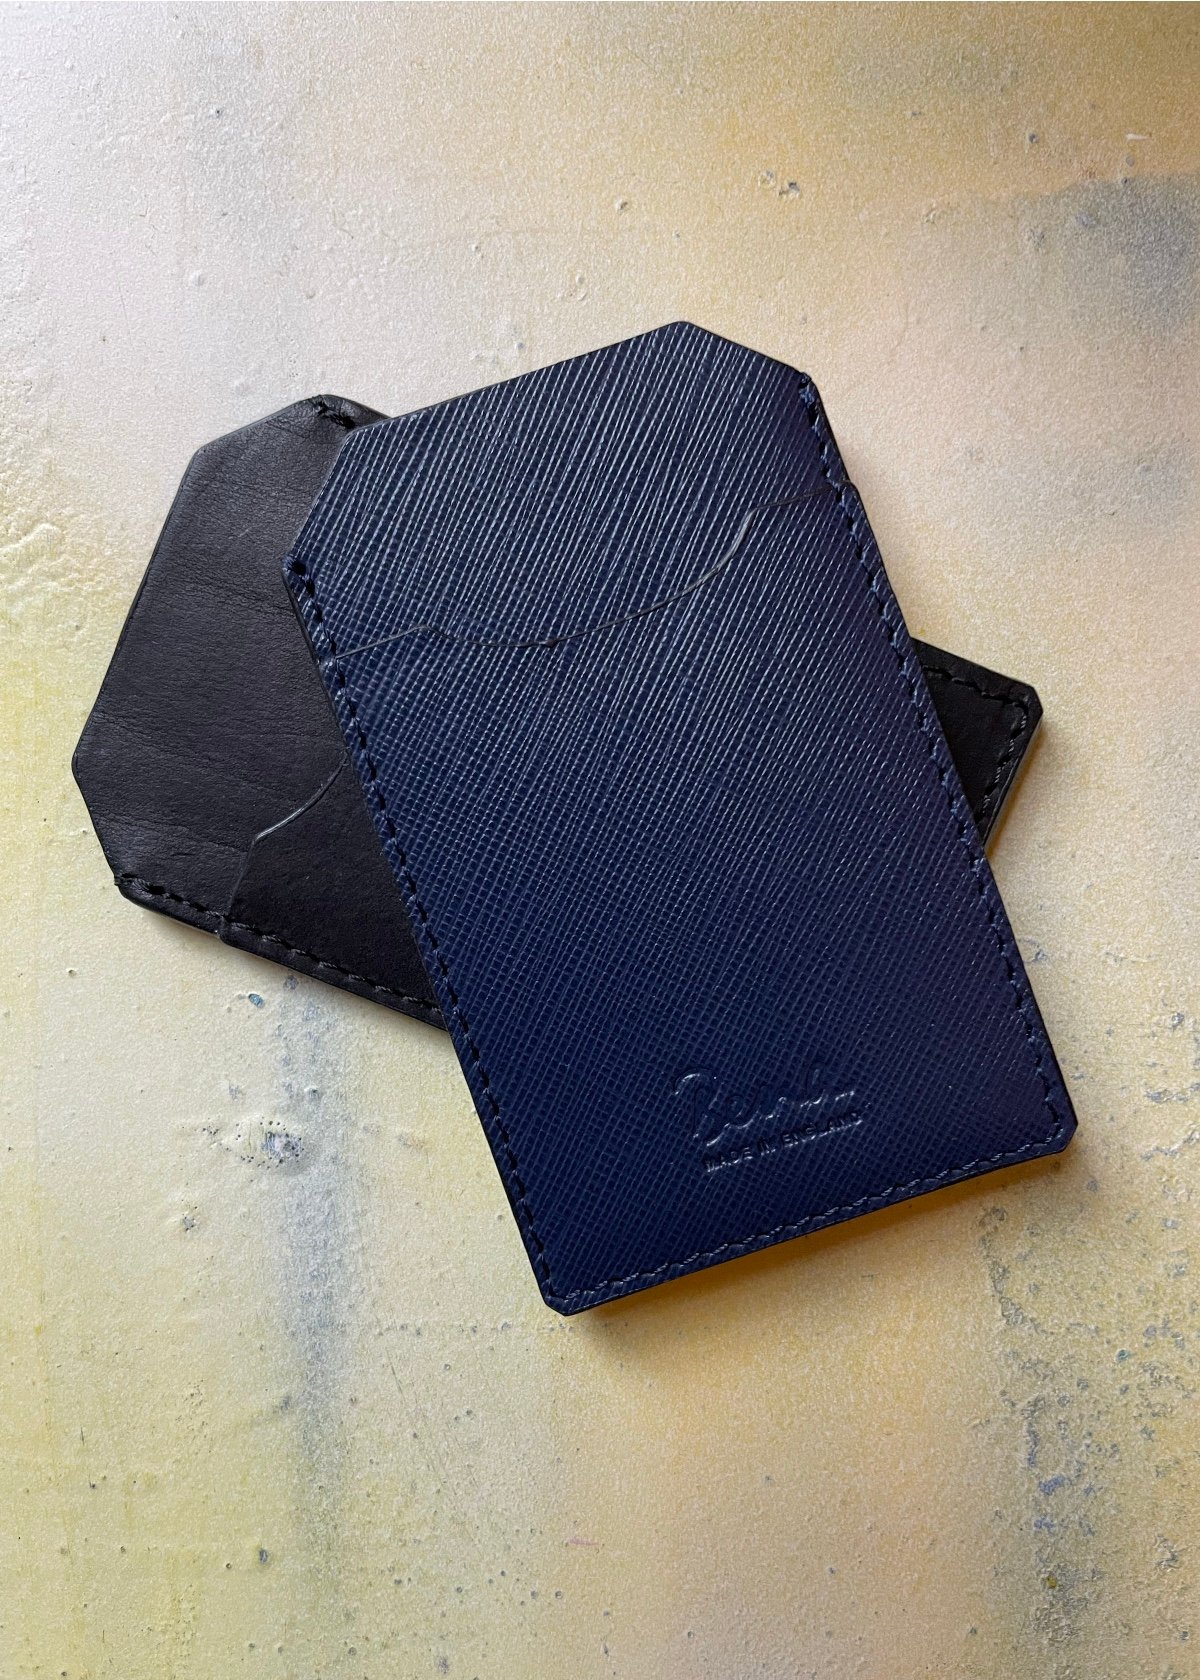 Image of Leather Card Holder